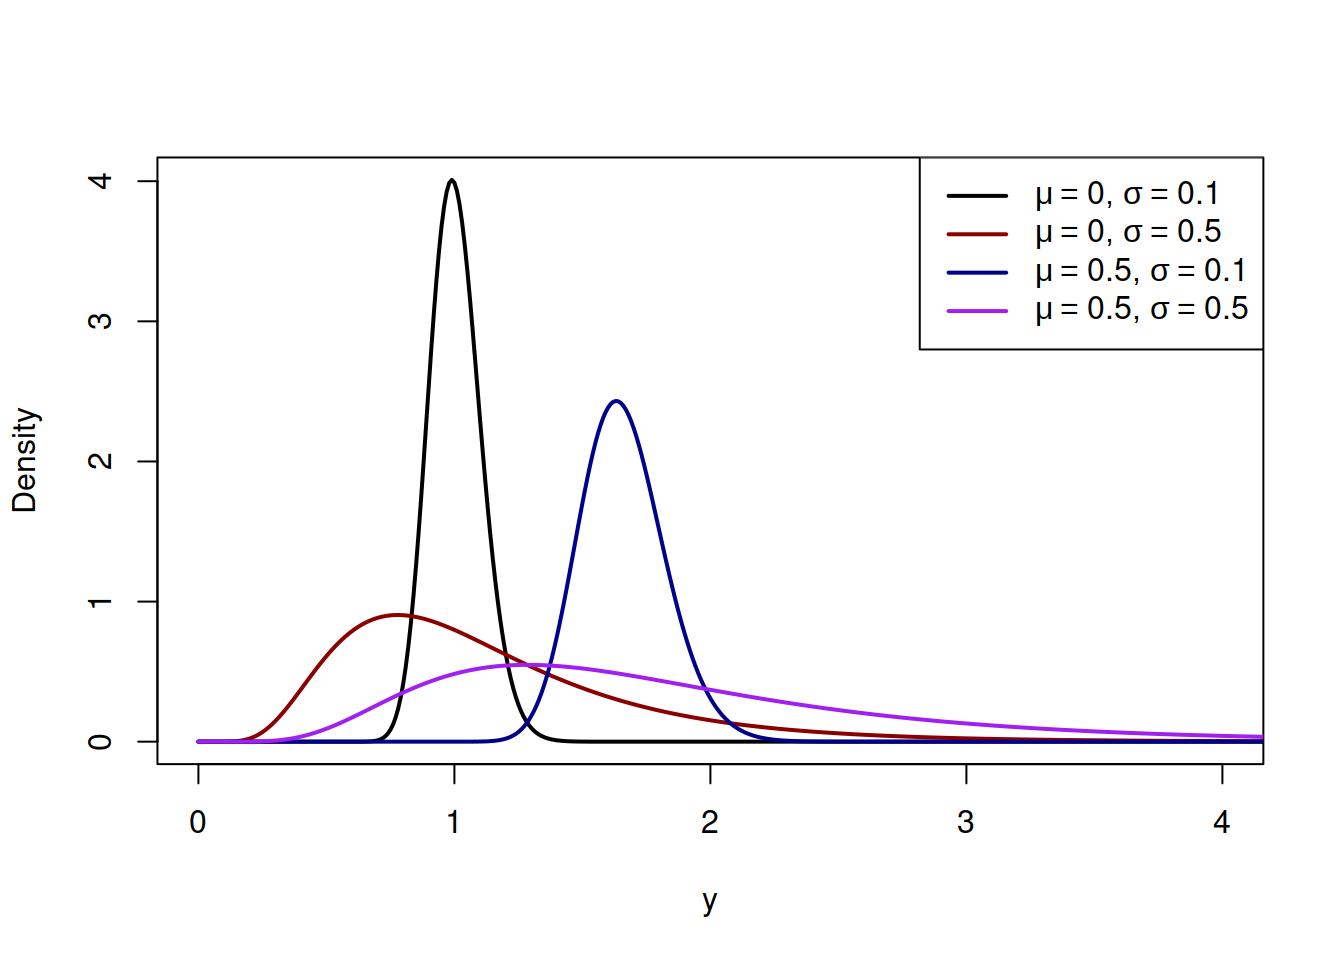 Probability Density Function of Log-Normal distribution with a variety of parameters.